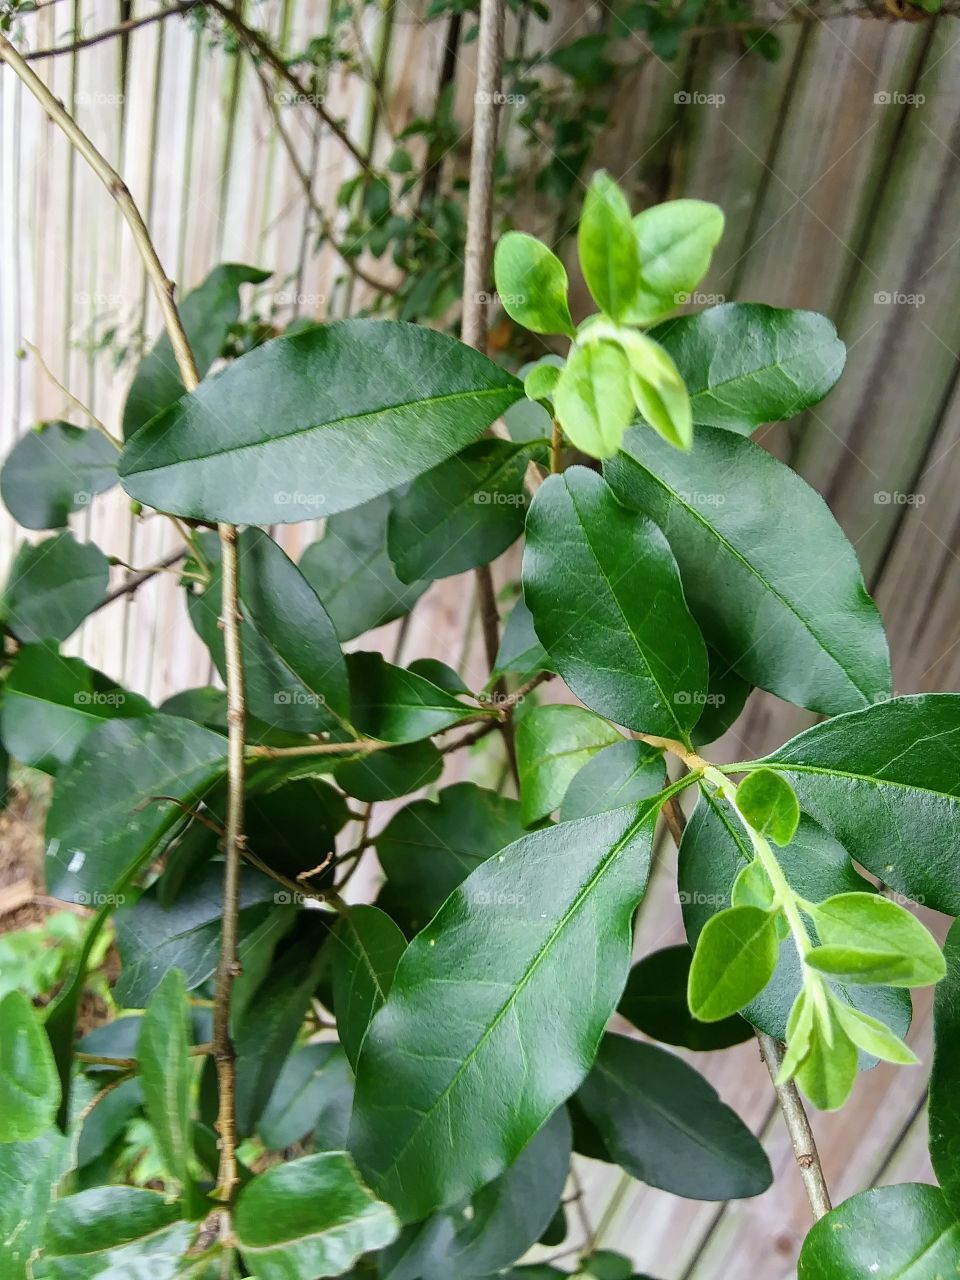 new growth on a tree branch